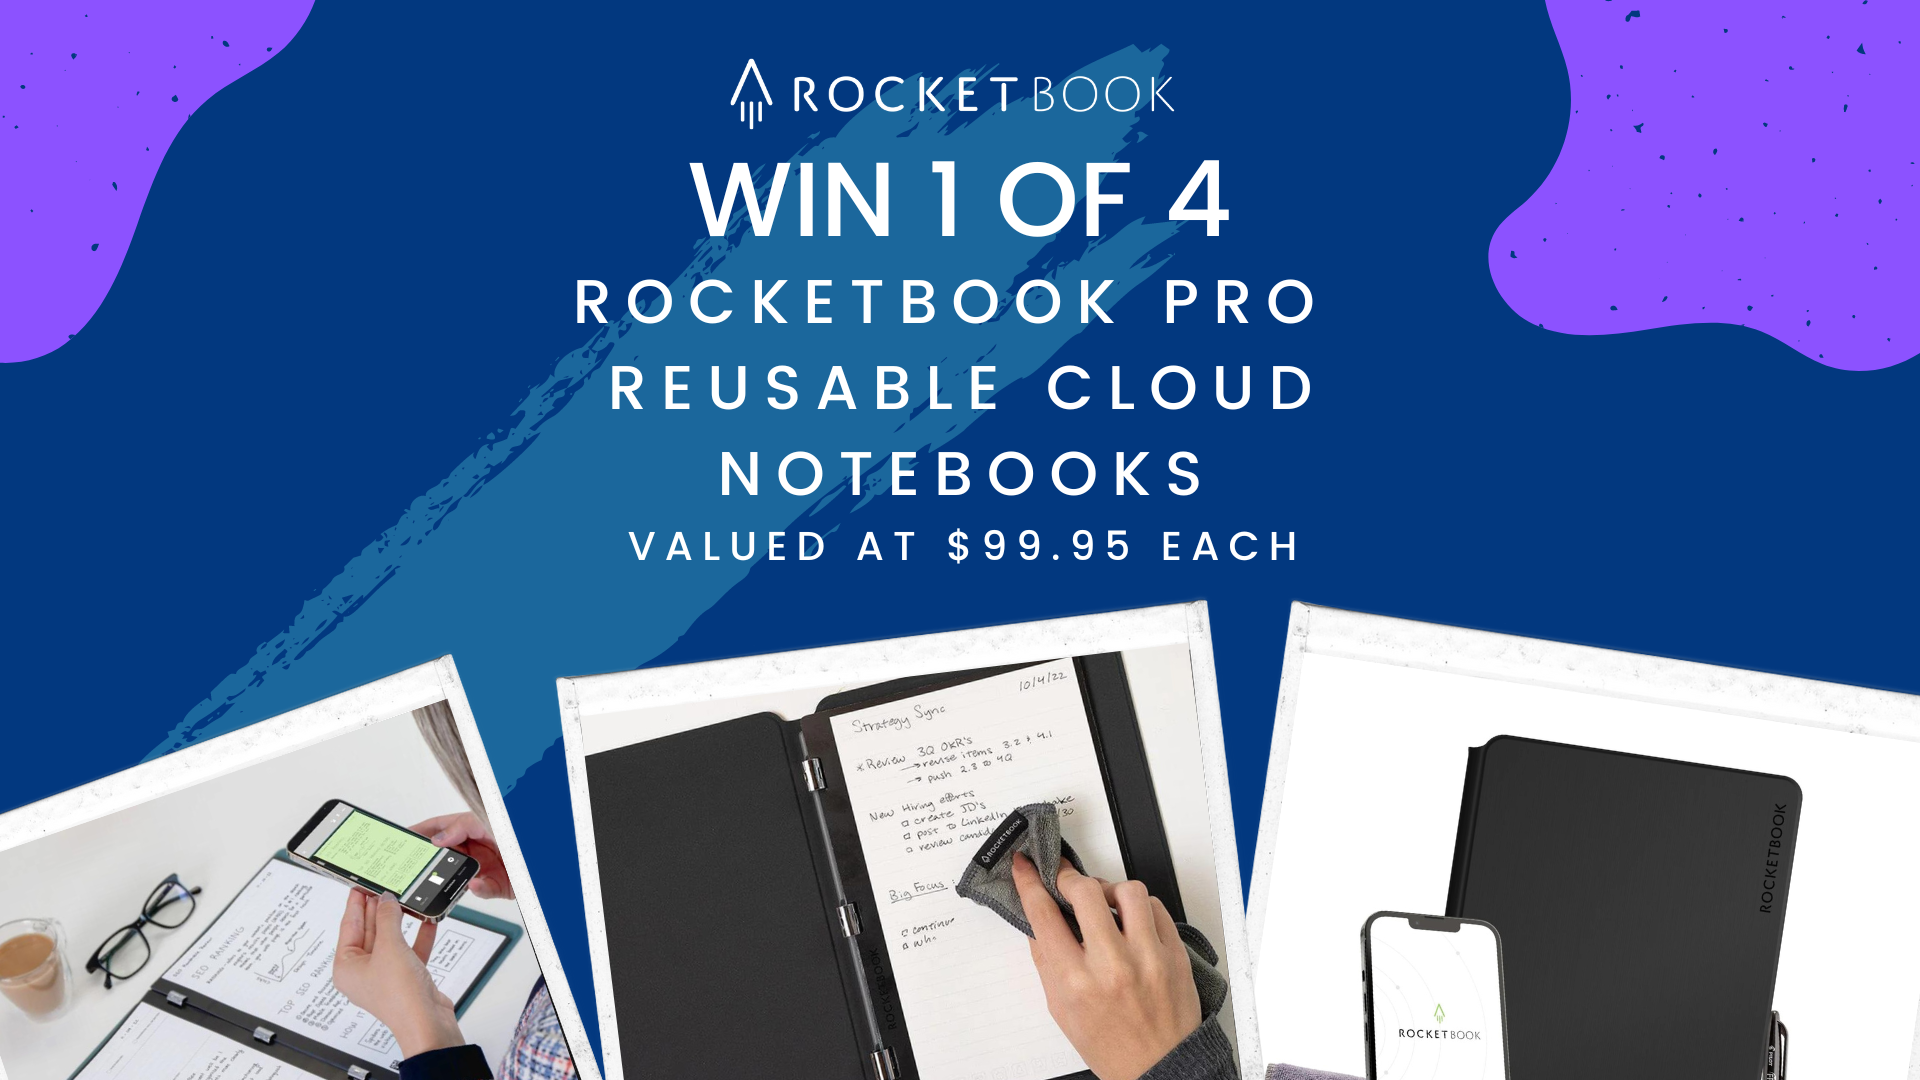 WIN 1 of 4 Rocketbook Pro notebooks valued at $99.95 each.